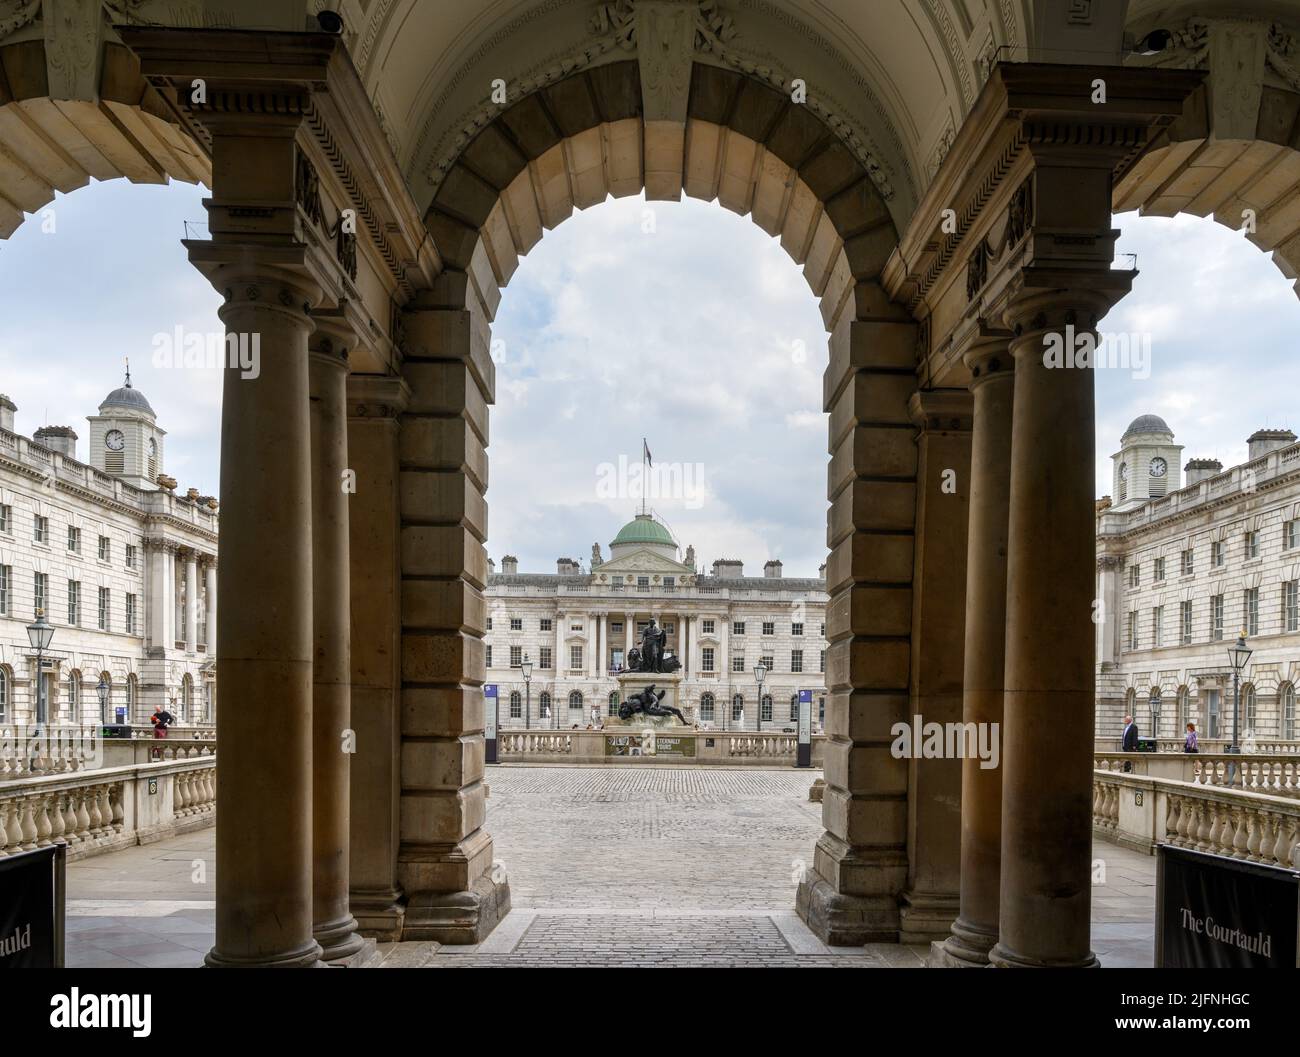 The Courtyard at Somerset House, The Strand, Londres, Angleterre, Royaume-Uni Banque D'Images